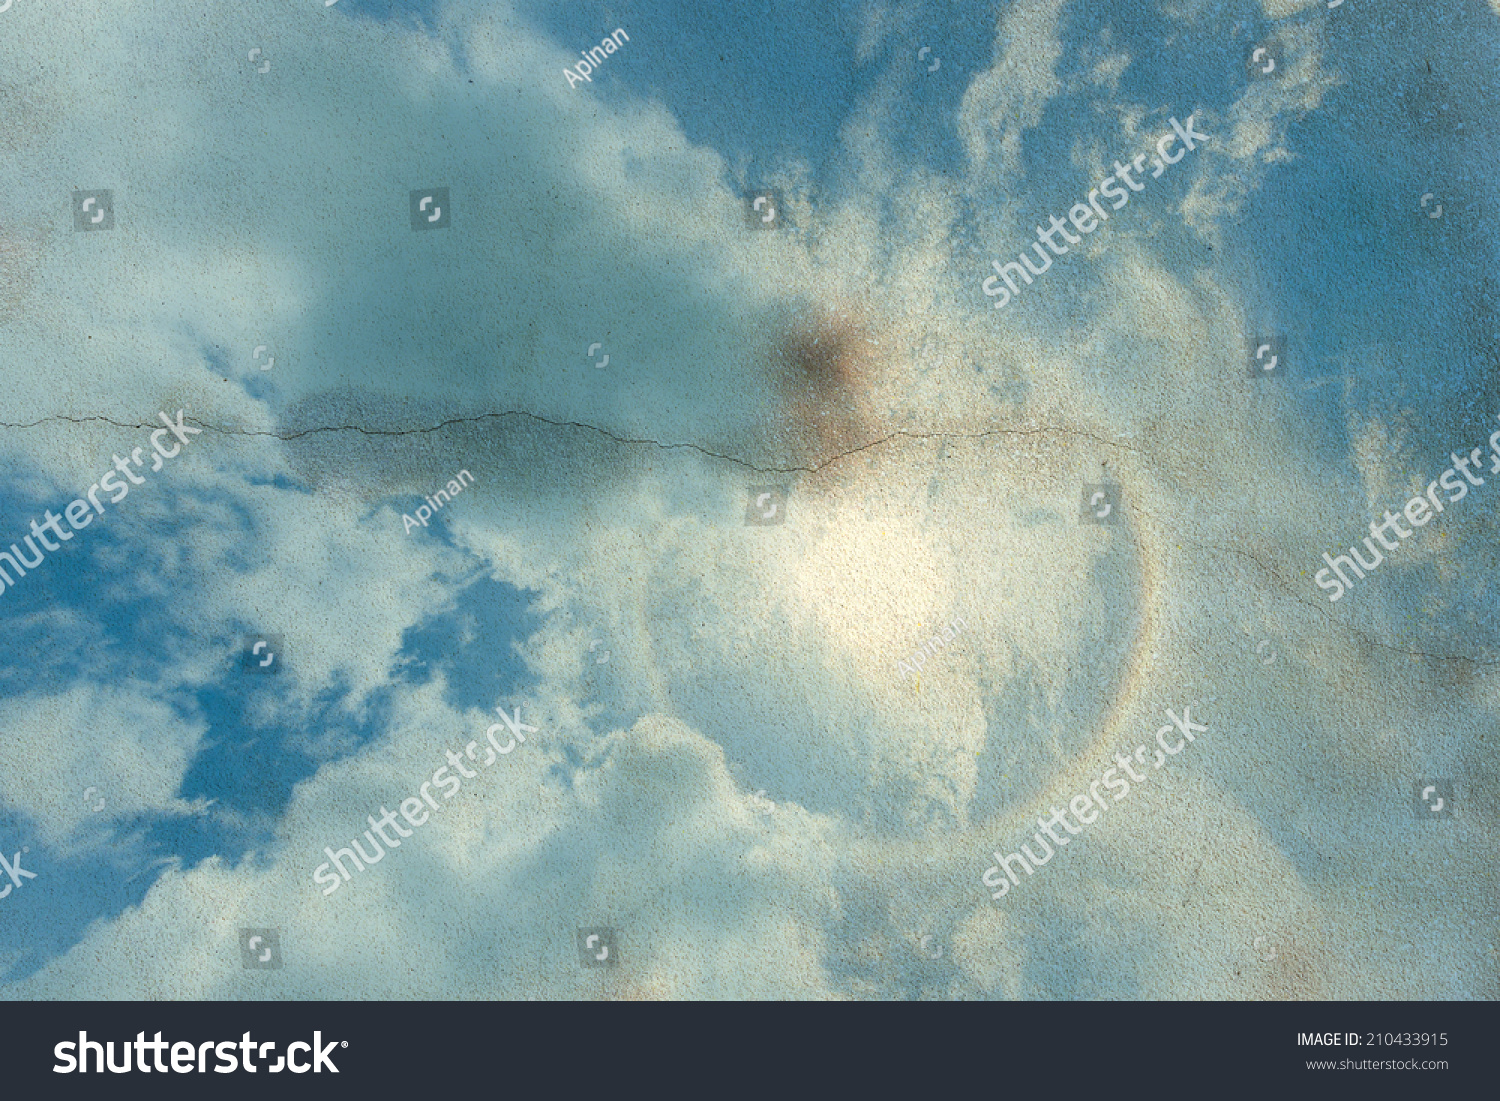 Sky Clouds On Wall Background Stock Photo Royalty Free 210433915